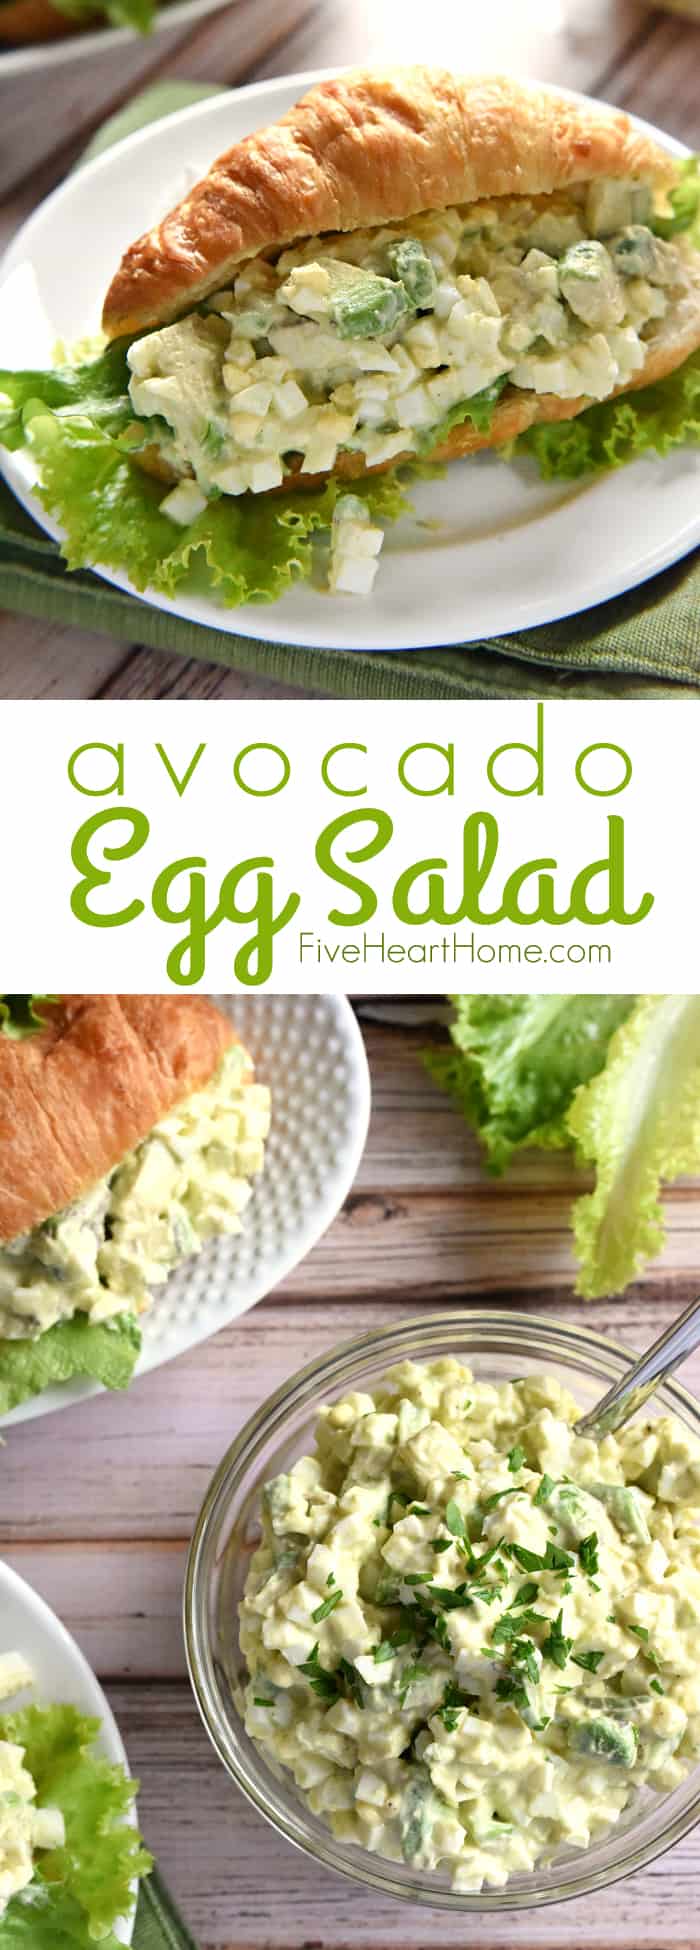 Avocado Egg Salad ~ avocado toast meets classic egg salad, lightened up with yogurt and studded with creamy chunks of avocado throughout...a perfect topping for sandwiches, crackers, or salads and a fantastic way to use up leftover hard-boiled eggs! | FiveHeartHome.com via @fivehearthome